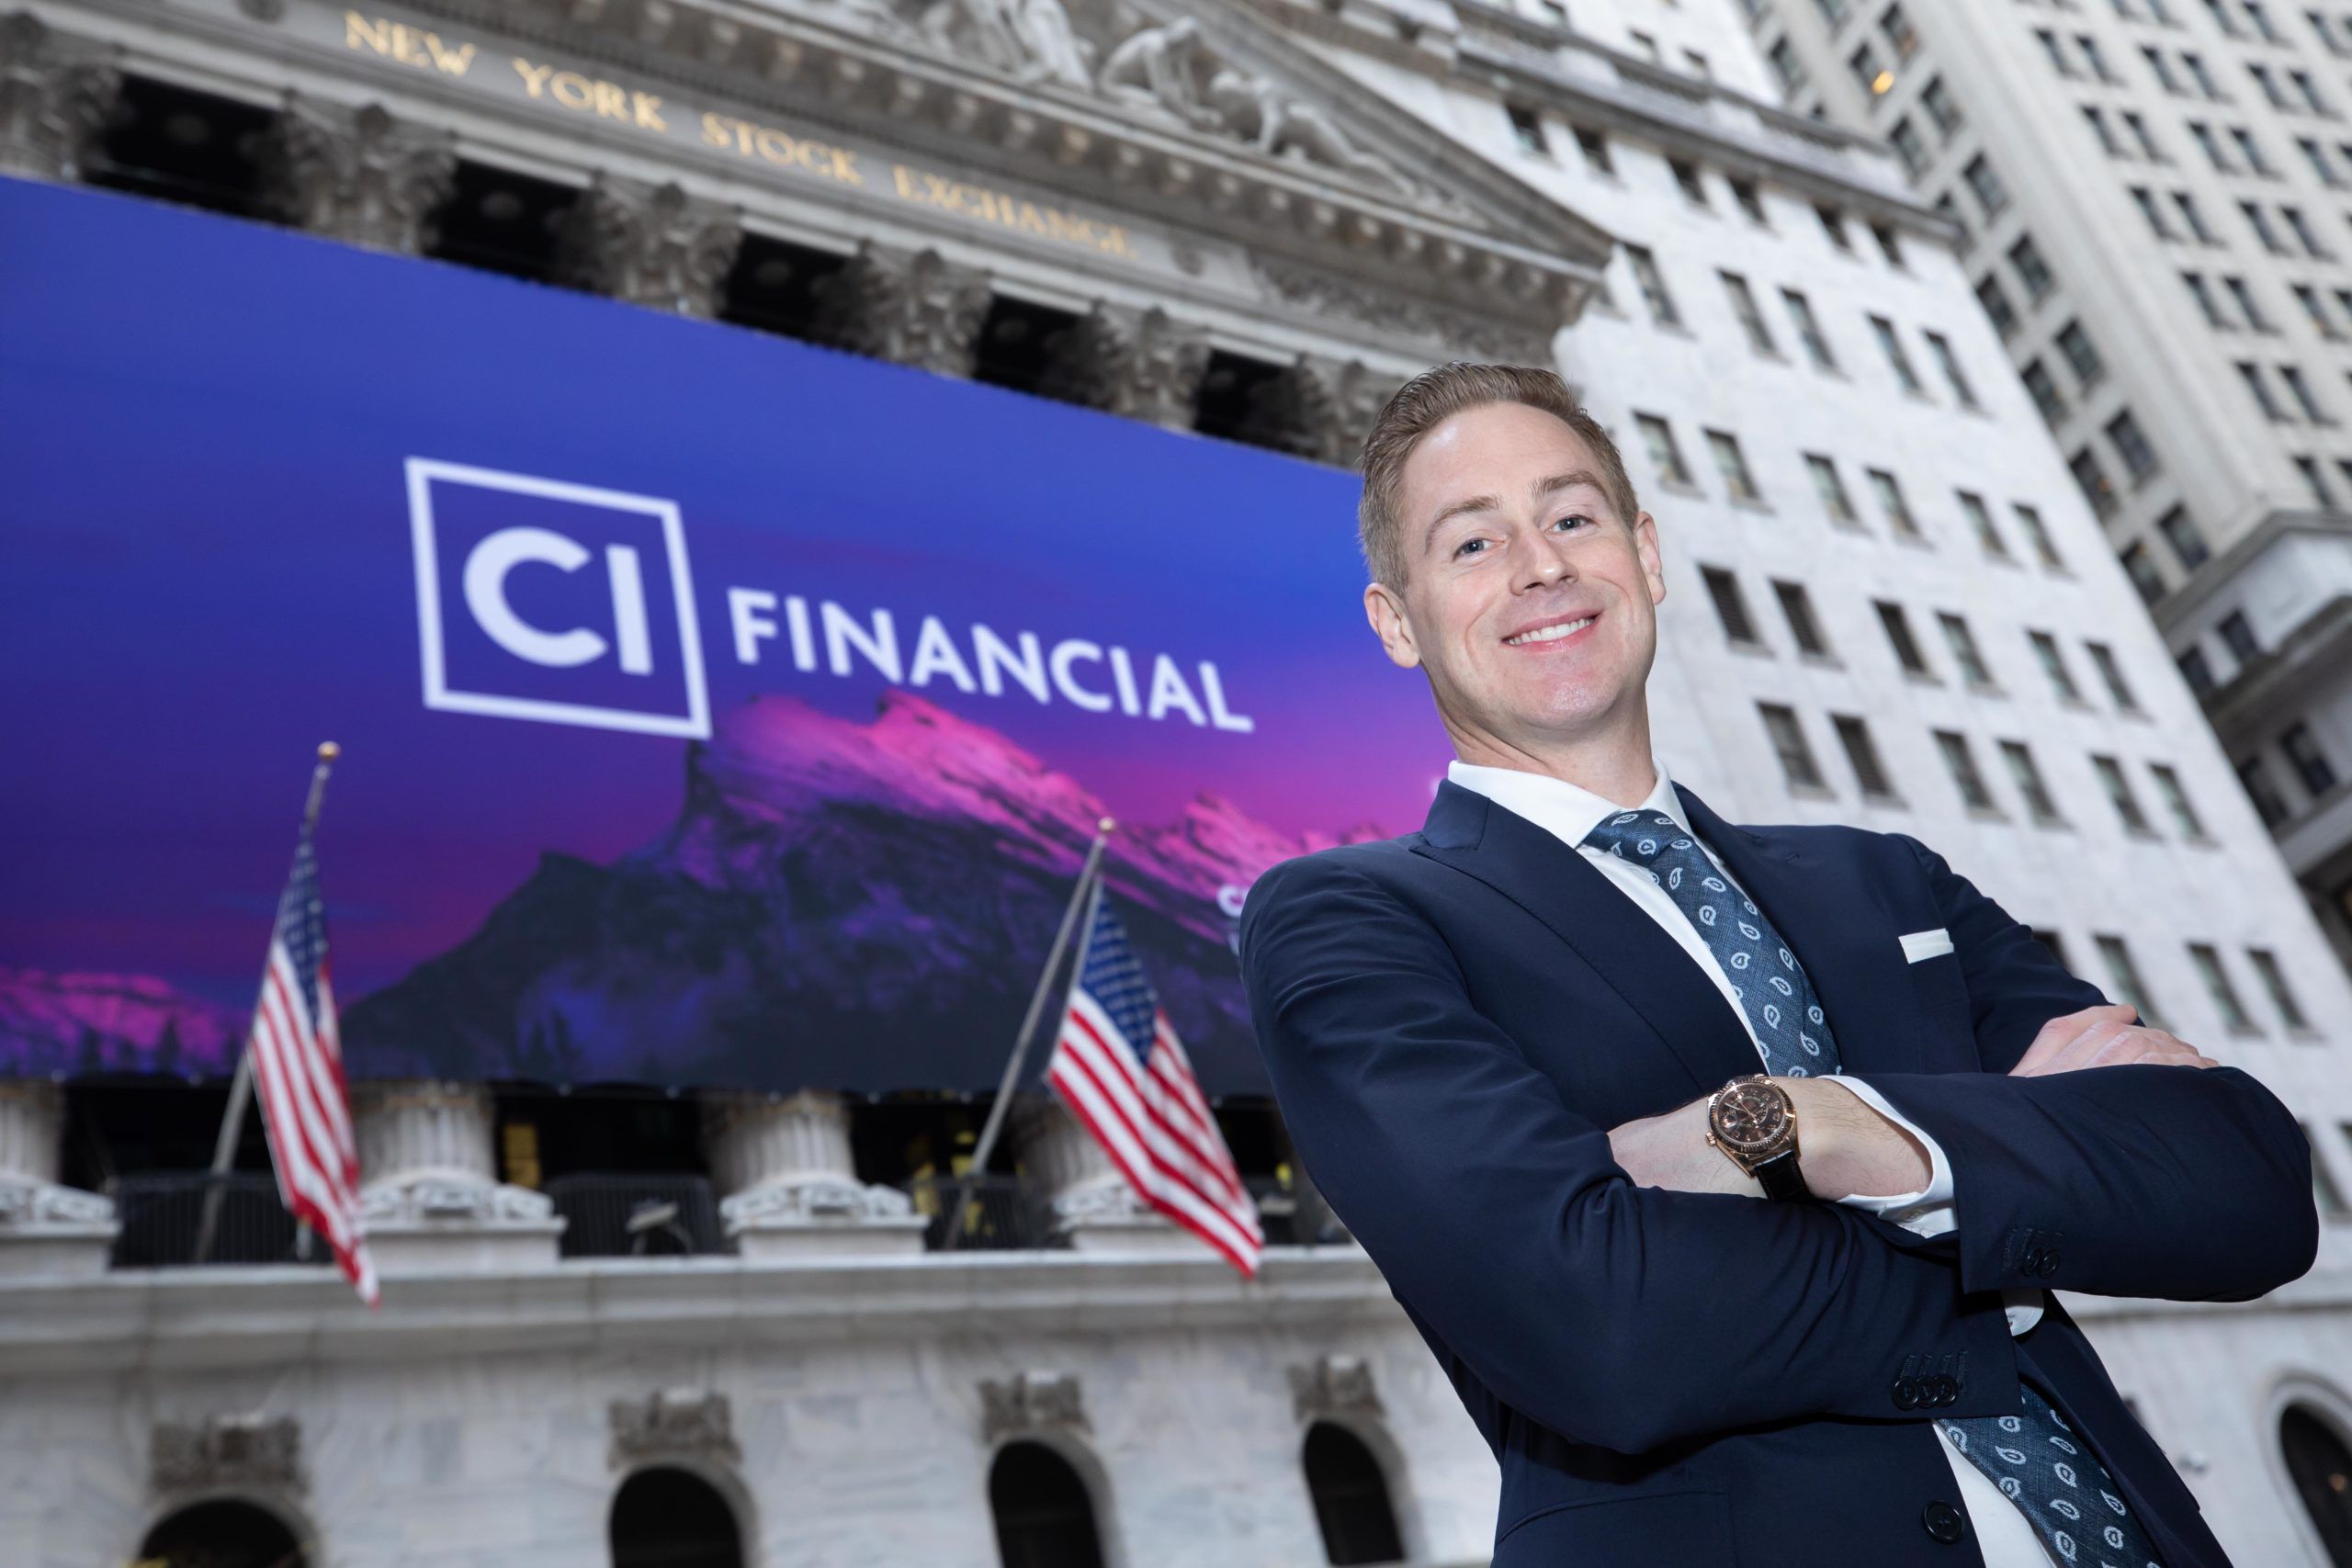 CI Financial Corp. (NYSE: CIXX) Rings The Opening Bell¨ 

The New York Stock Exchange welcomes executives and guests of CI Financial Corp. (NYSE: CIXX), today, Tuesday, November 17th, 2020, in celebration of listing its common shares on the NYSE. To honor the occasion, Kurt MacAlpine, CEO, joined by Chris Taylor,ÊVP, NYSE Listings and Services, rings The Opening Bell¨.
Ê
Photo Credit: NYSE